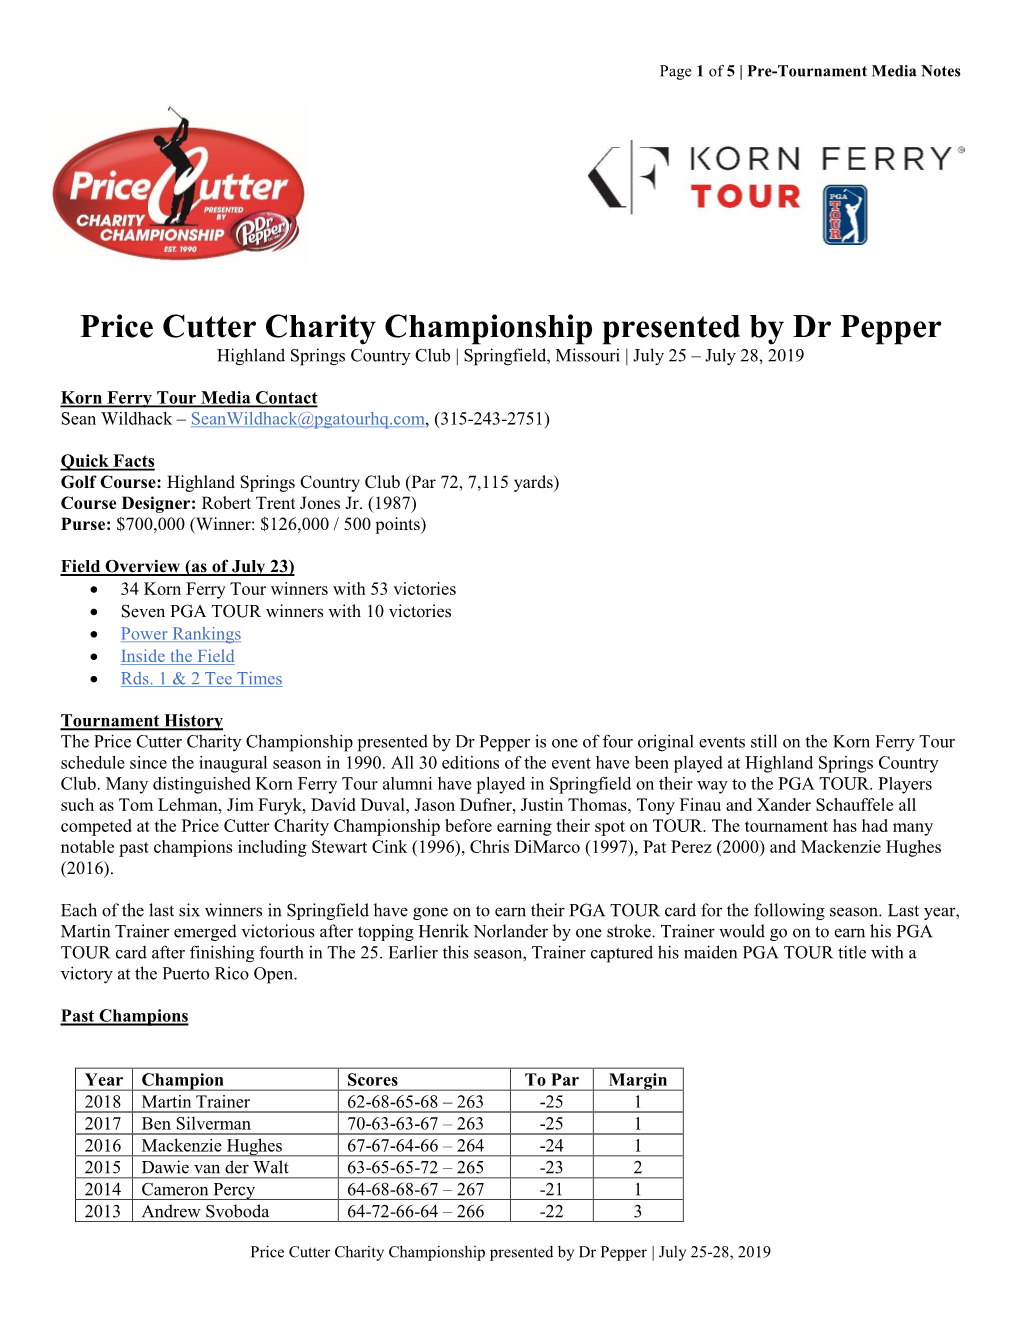 Price Cutter Charity Championship Presented by Dr Pepper Highland Springs Country Club | Springfield, Missouri | July 25 – July 28, 2019